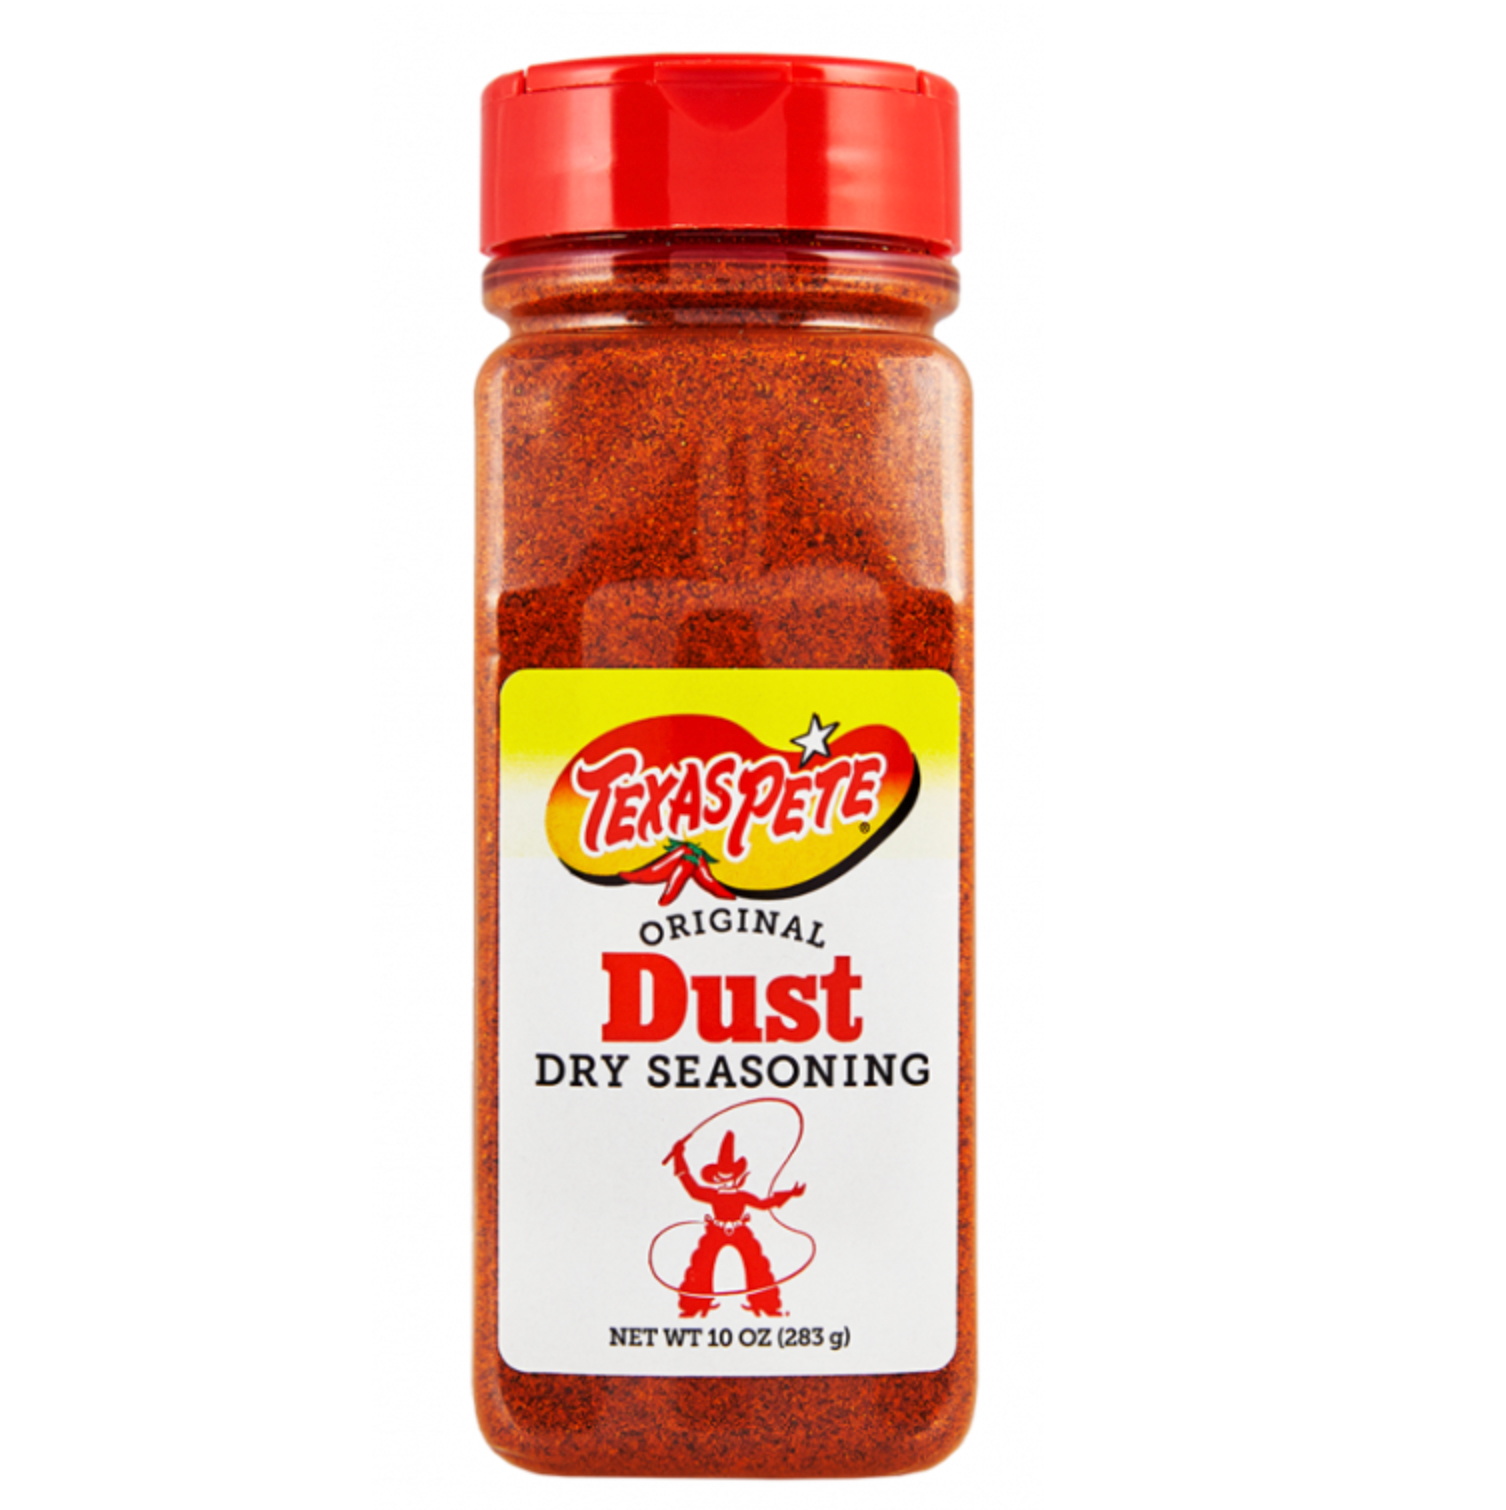 Texas Pete® DUST Dry Seasoning is ideal for spicing up menu items such as bread sticks or pizza crusts.